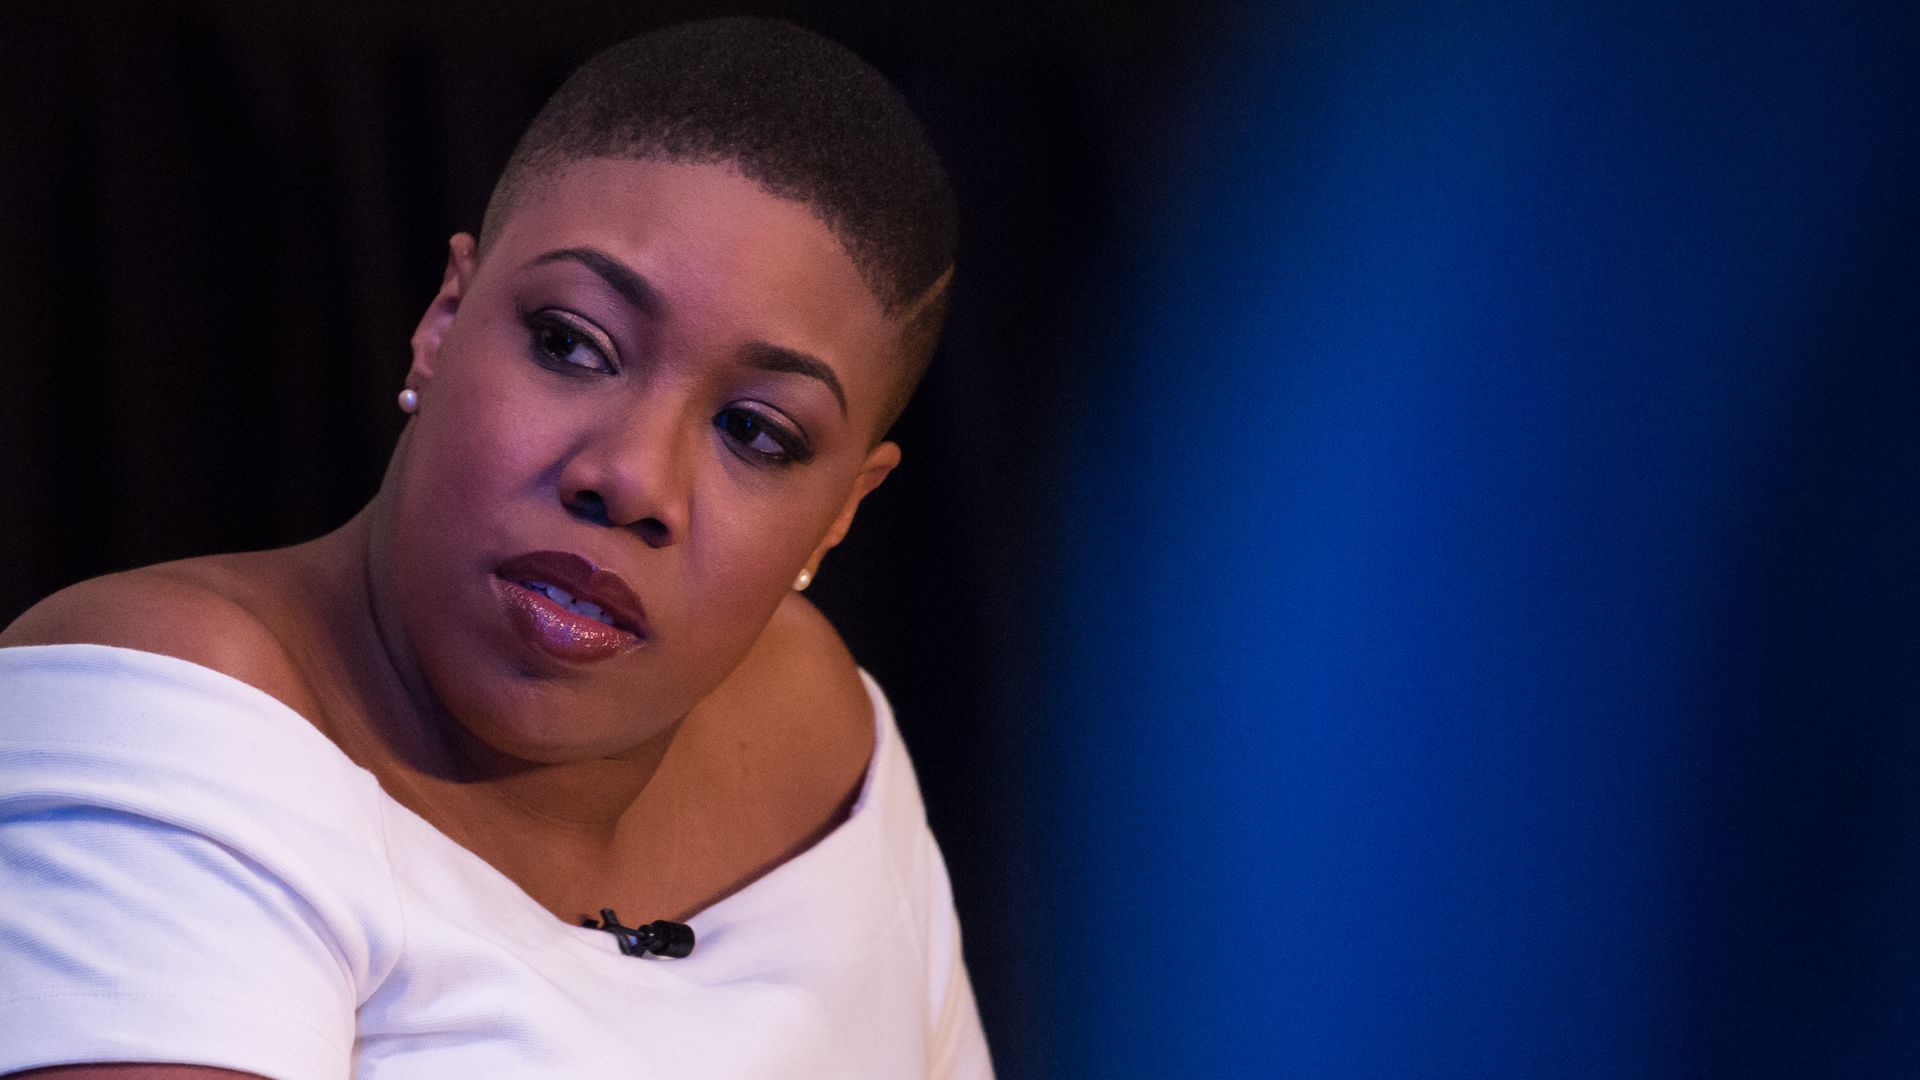 Symone Sanders during a panel in Washington, D.C., in 2017.